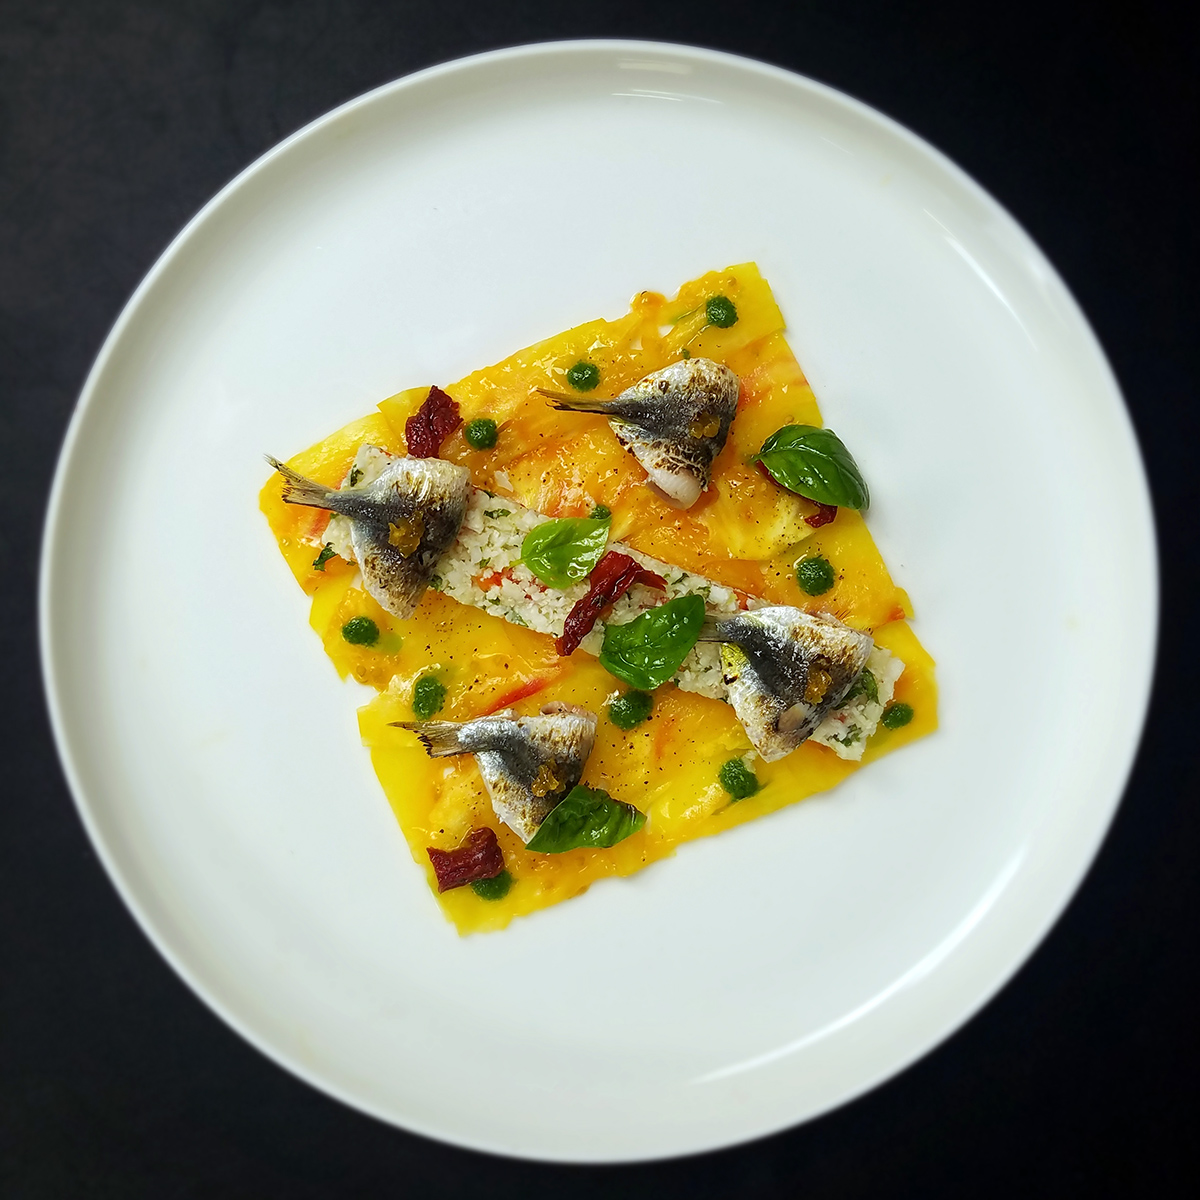 Quickly cooked sardines, cauliflower semolina and yellow tomato carpaccio.
Sardines juste cuites, semoule de chou-fleur et carpaccio de tomate ananas
.
#gastronomicom #frenchculinary #frenchcooking #frenchcuisine #frenchcookery #culinaryschool #learntocook